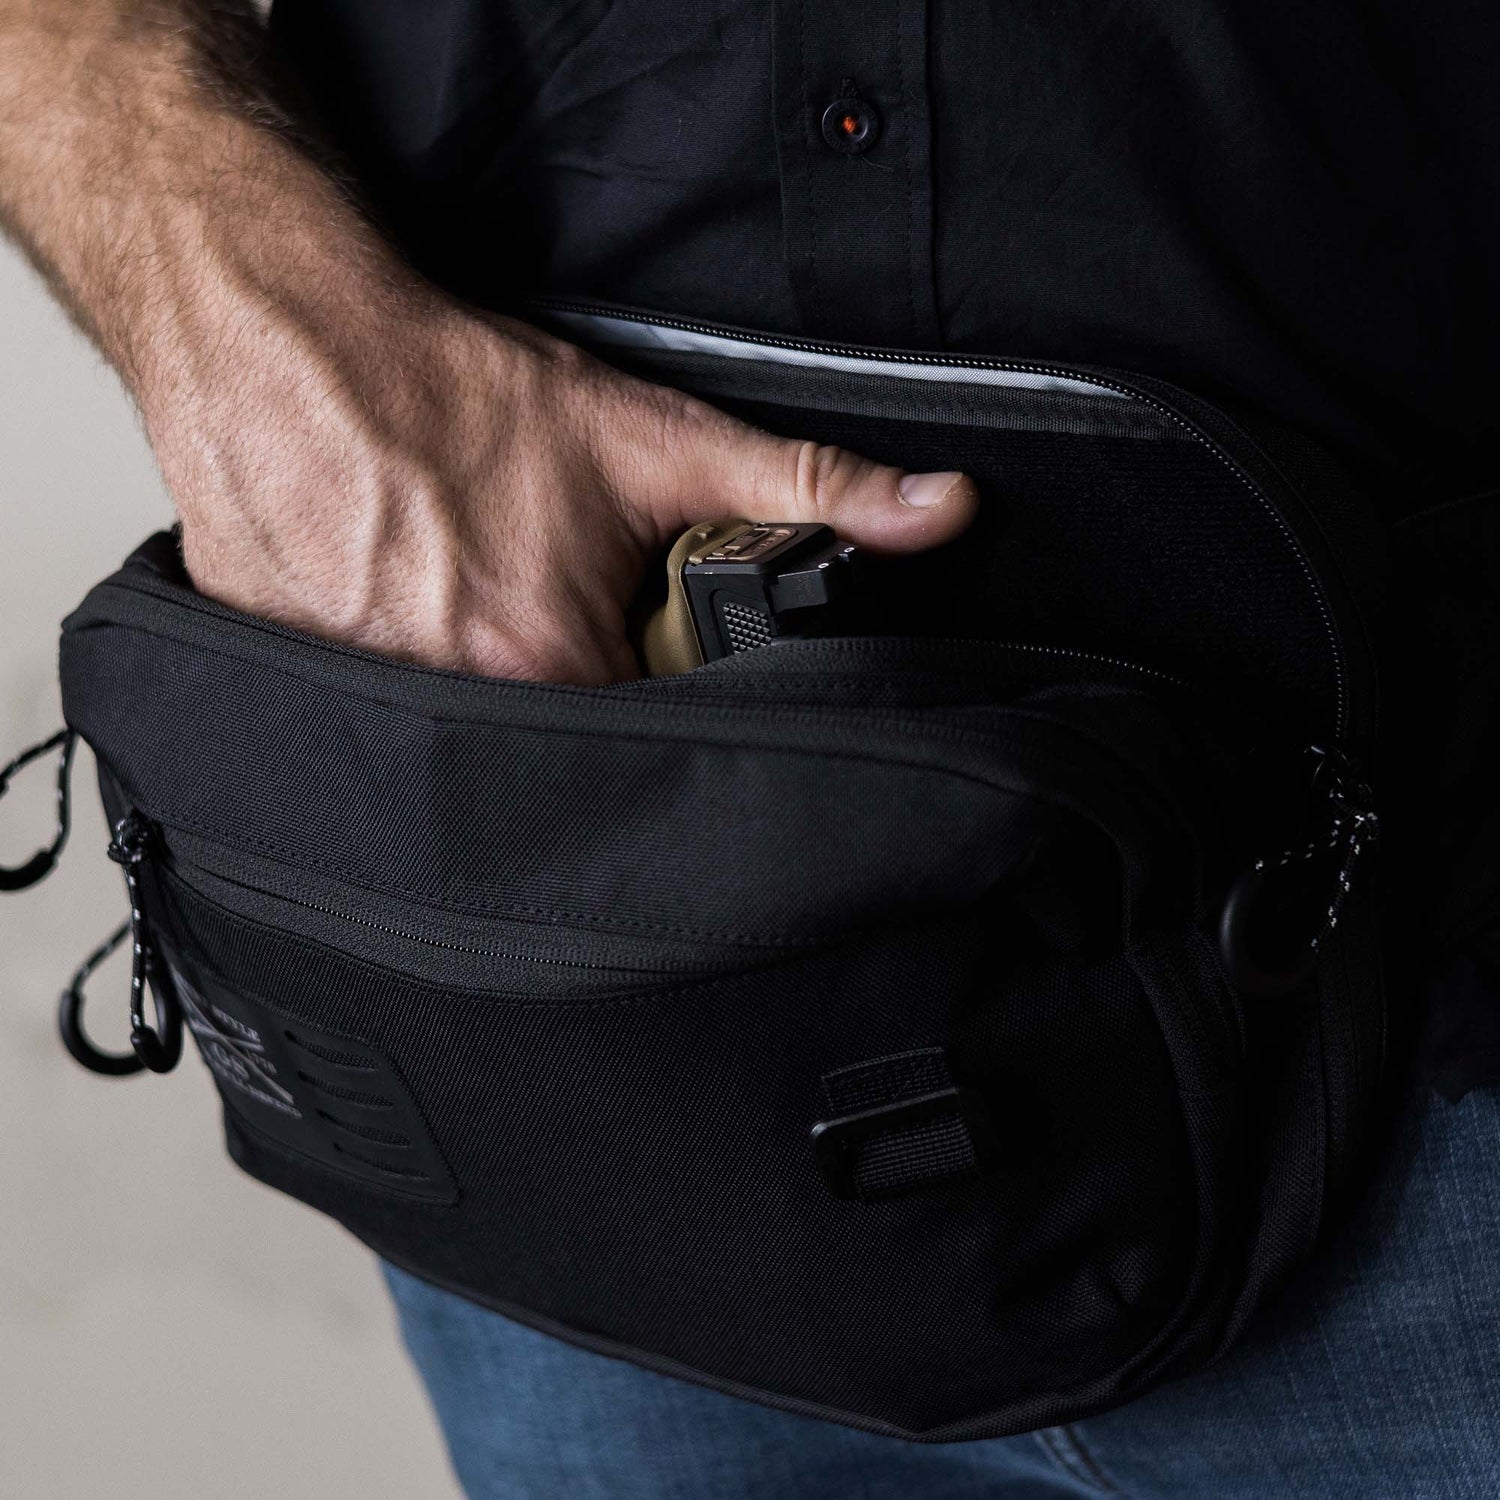 Concealed Black EDC Fanny Pack | Grunt Style 